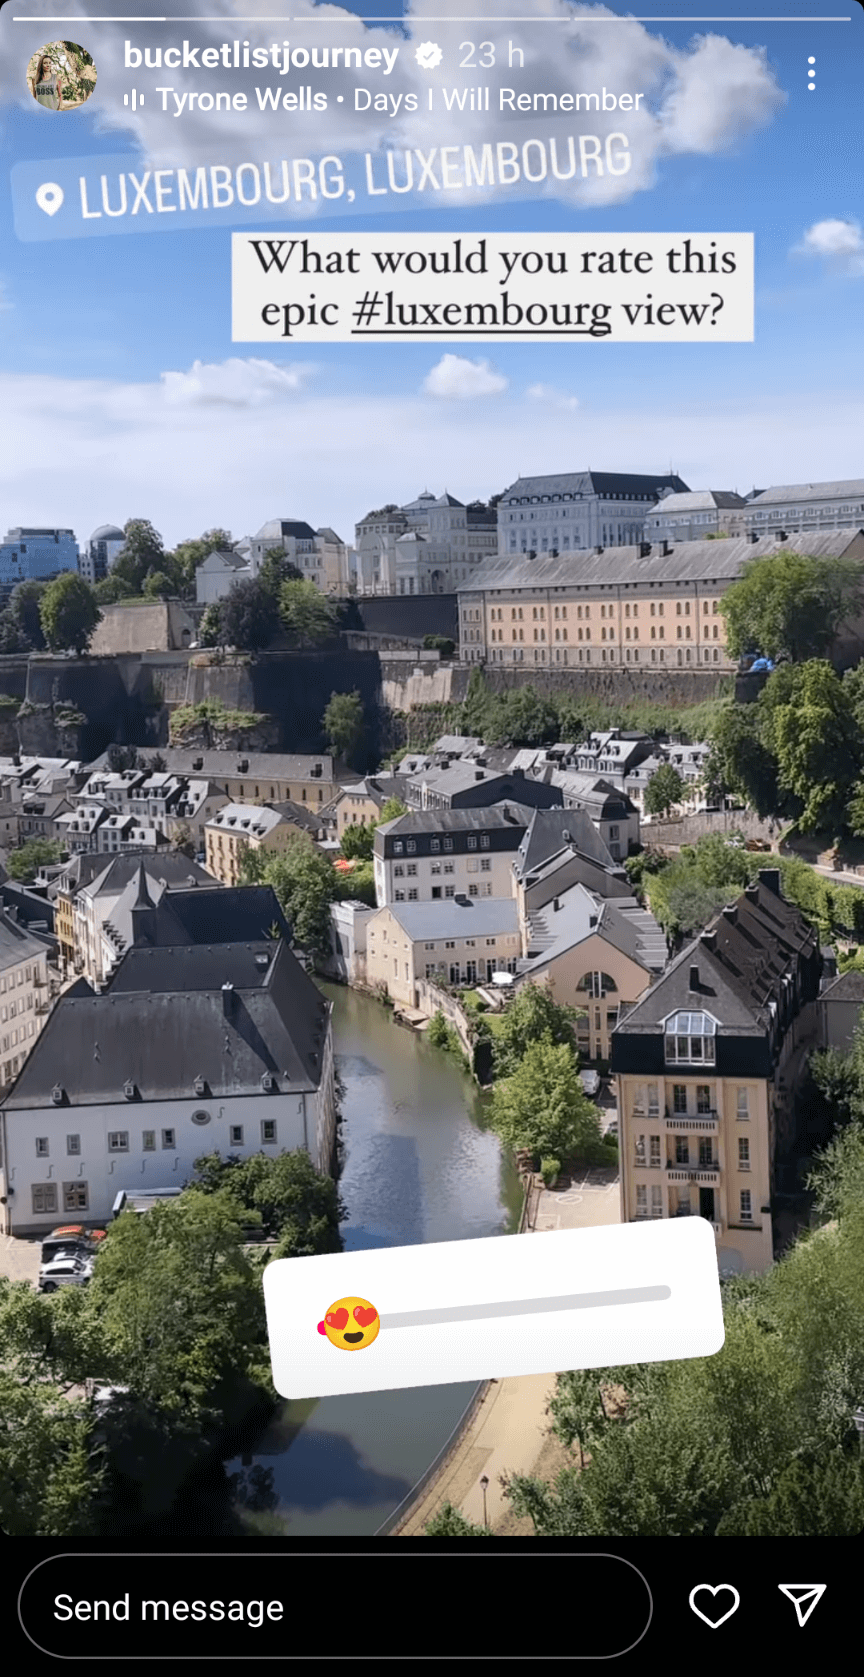 conversions-with-instagram-stories-bucketlistjourney-luxembourg-story-2-2